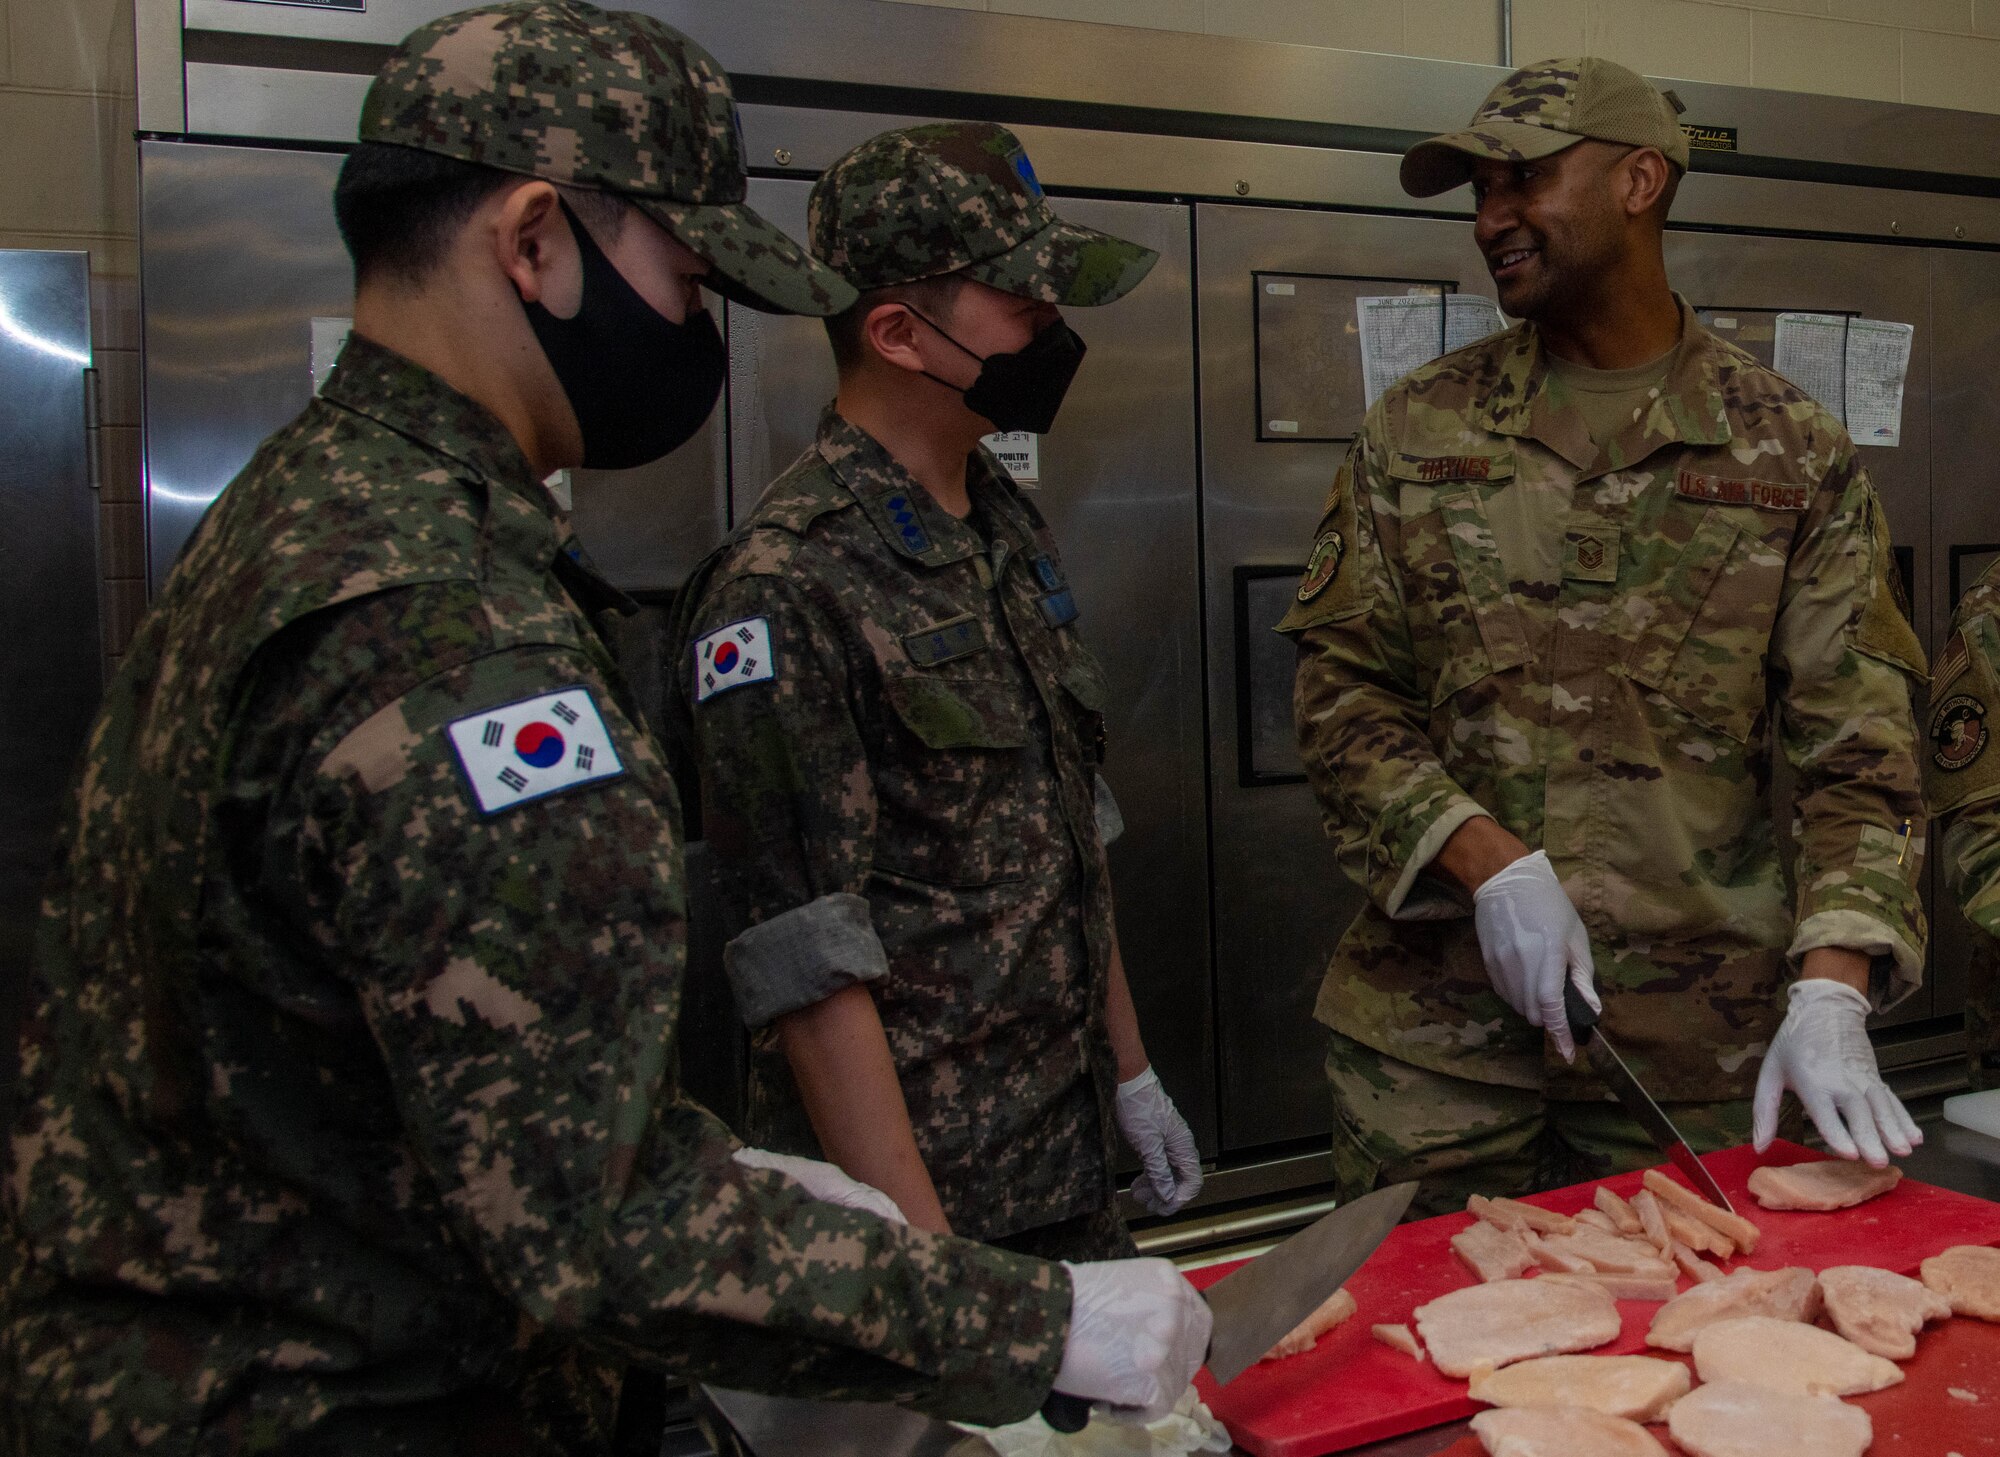 U.S. Service member cutting raw chicken in front of ROKAF service members